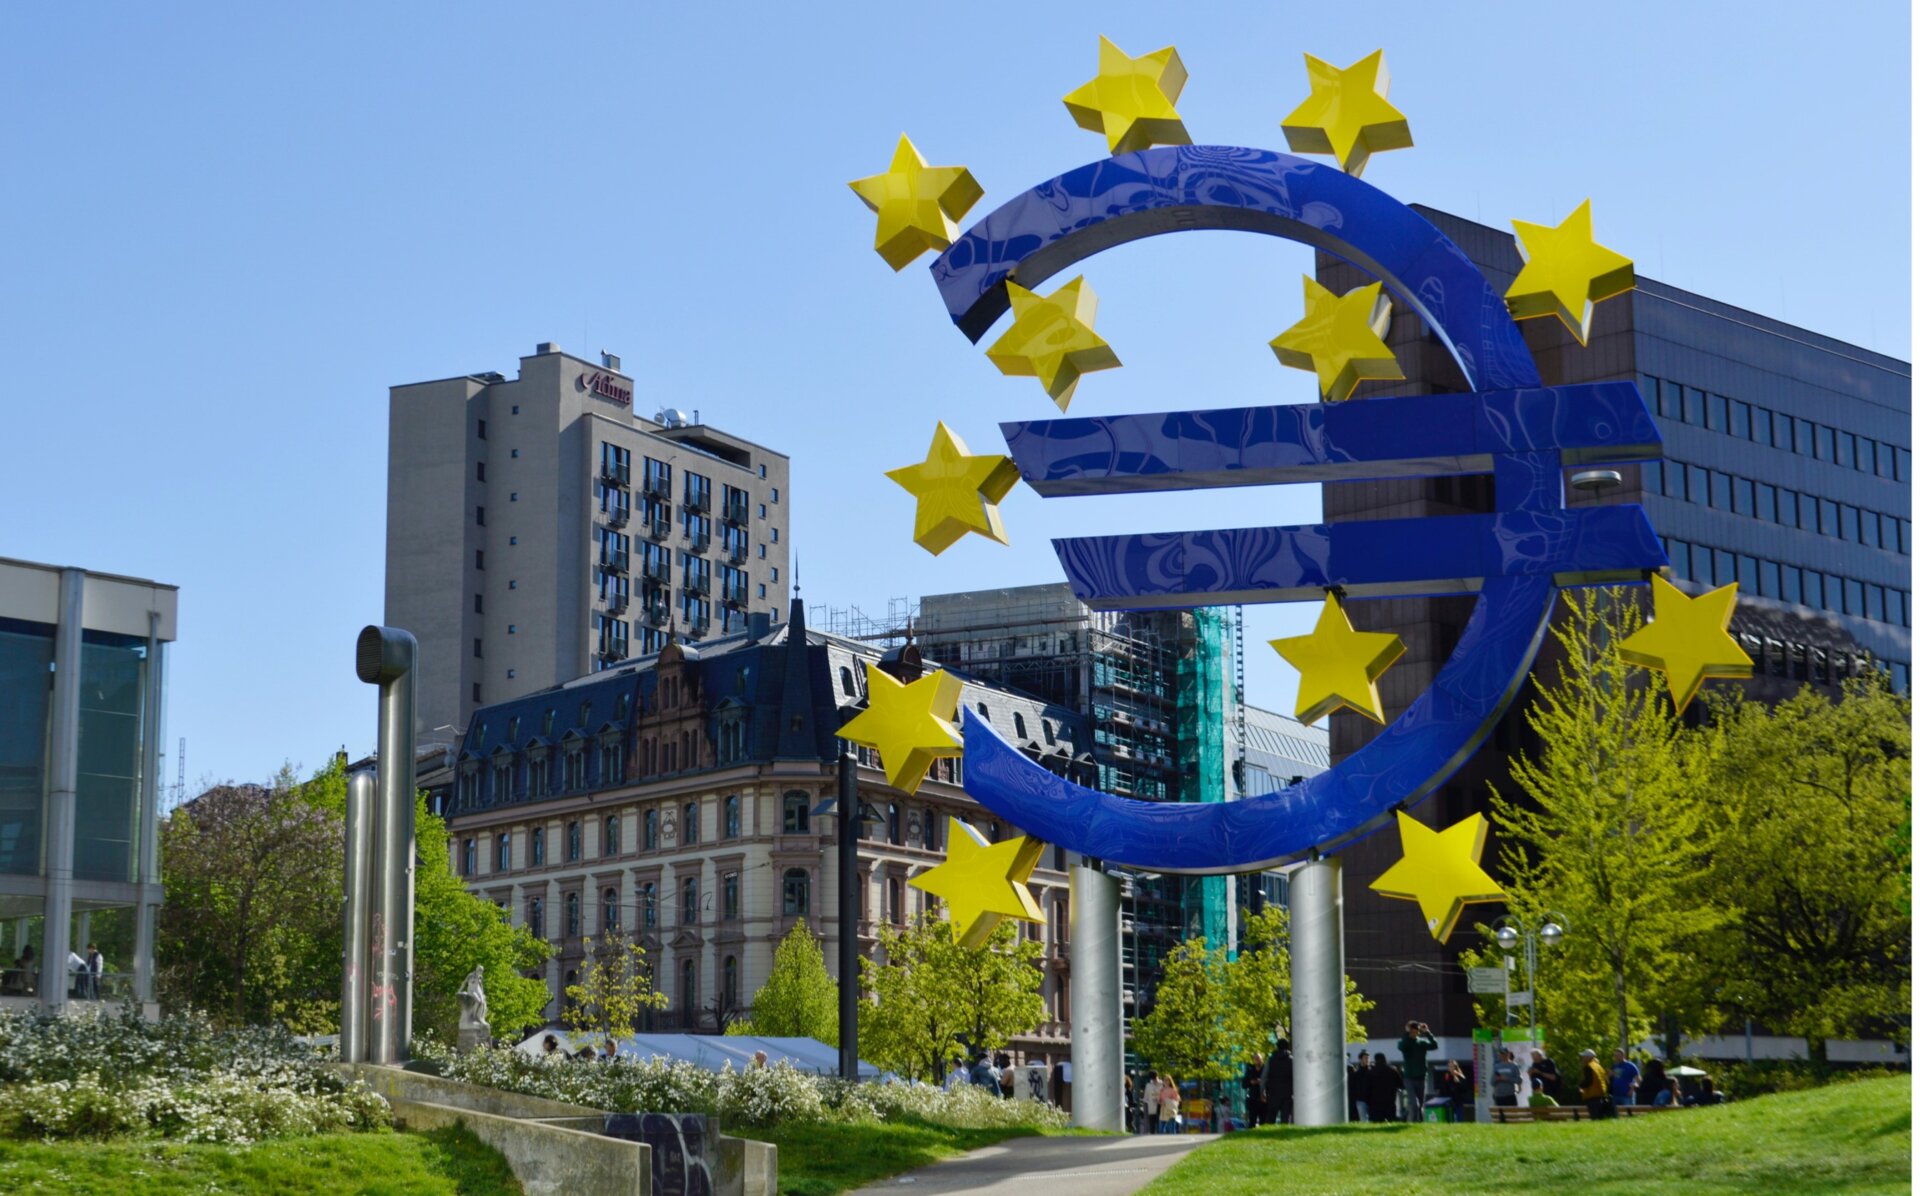 The photo shows the sculpture of an euro symbol from behind, so the symbol appears reverted. The sculpture is placed at the headquarters of the European Central Bank in Frankfurt, Germany.